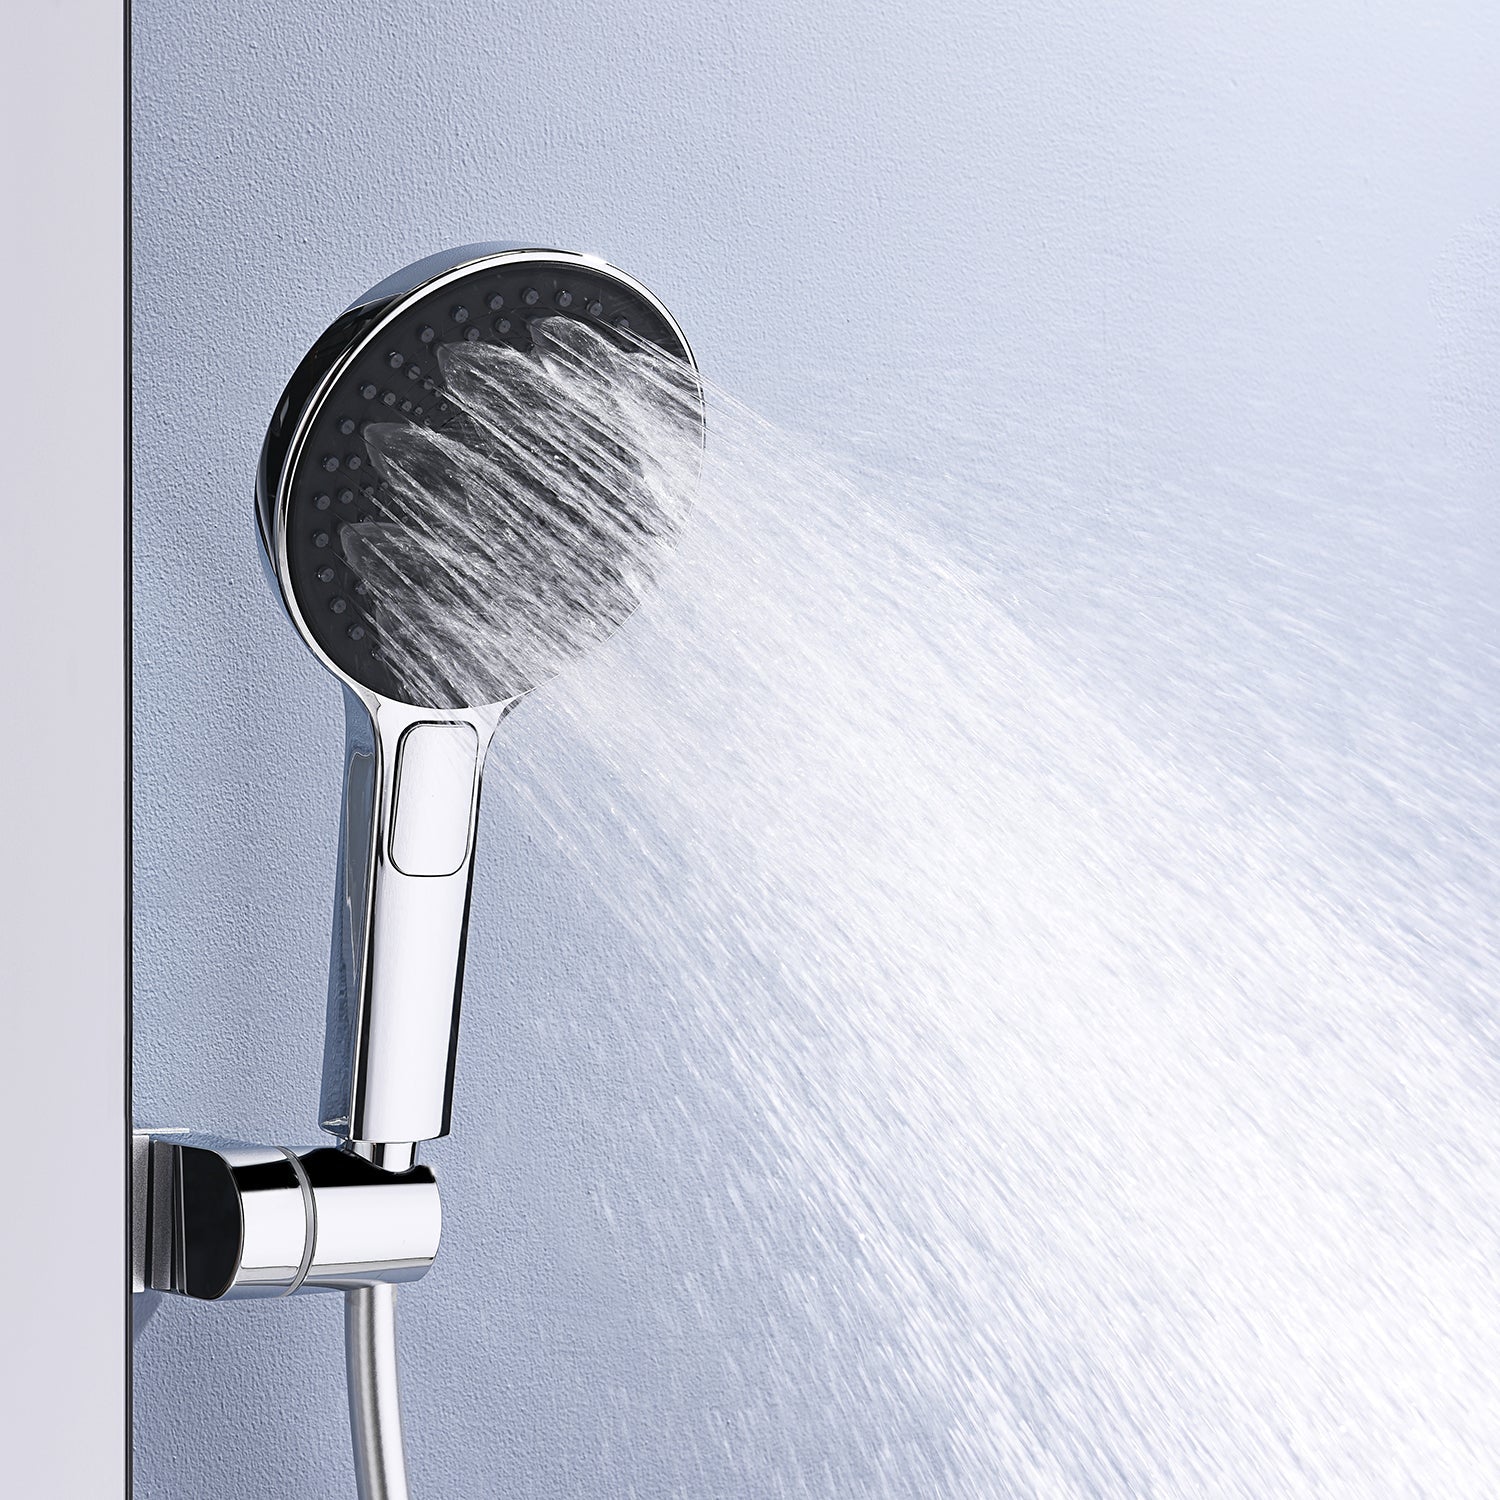 Lefton Thermostatic Shower System with Rainfall Showerhead & Digital Temperature Display-RSS2301 -- Lefton Home